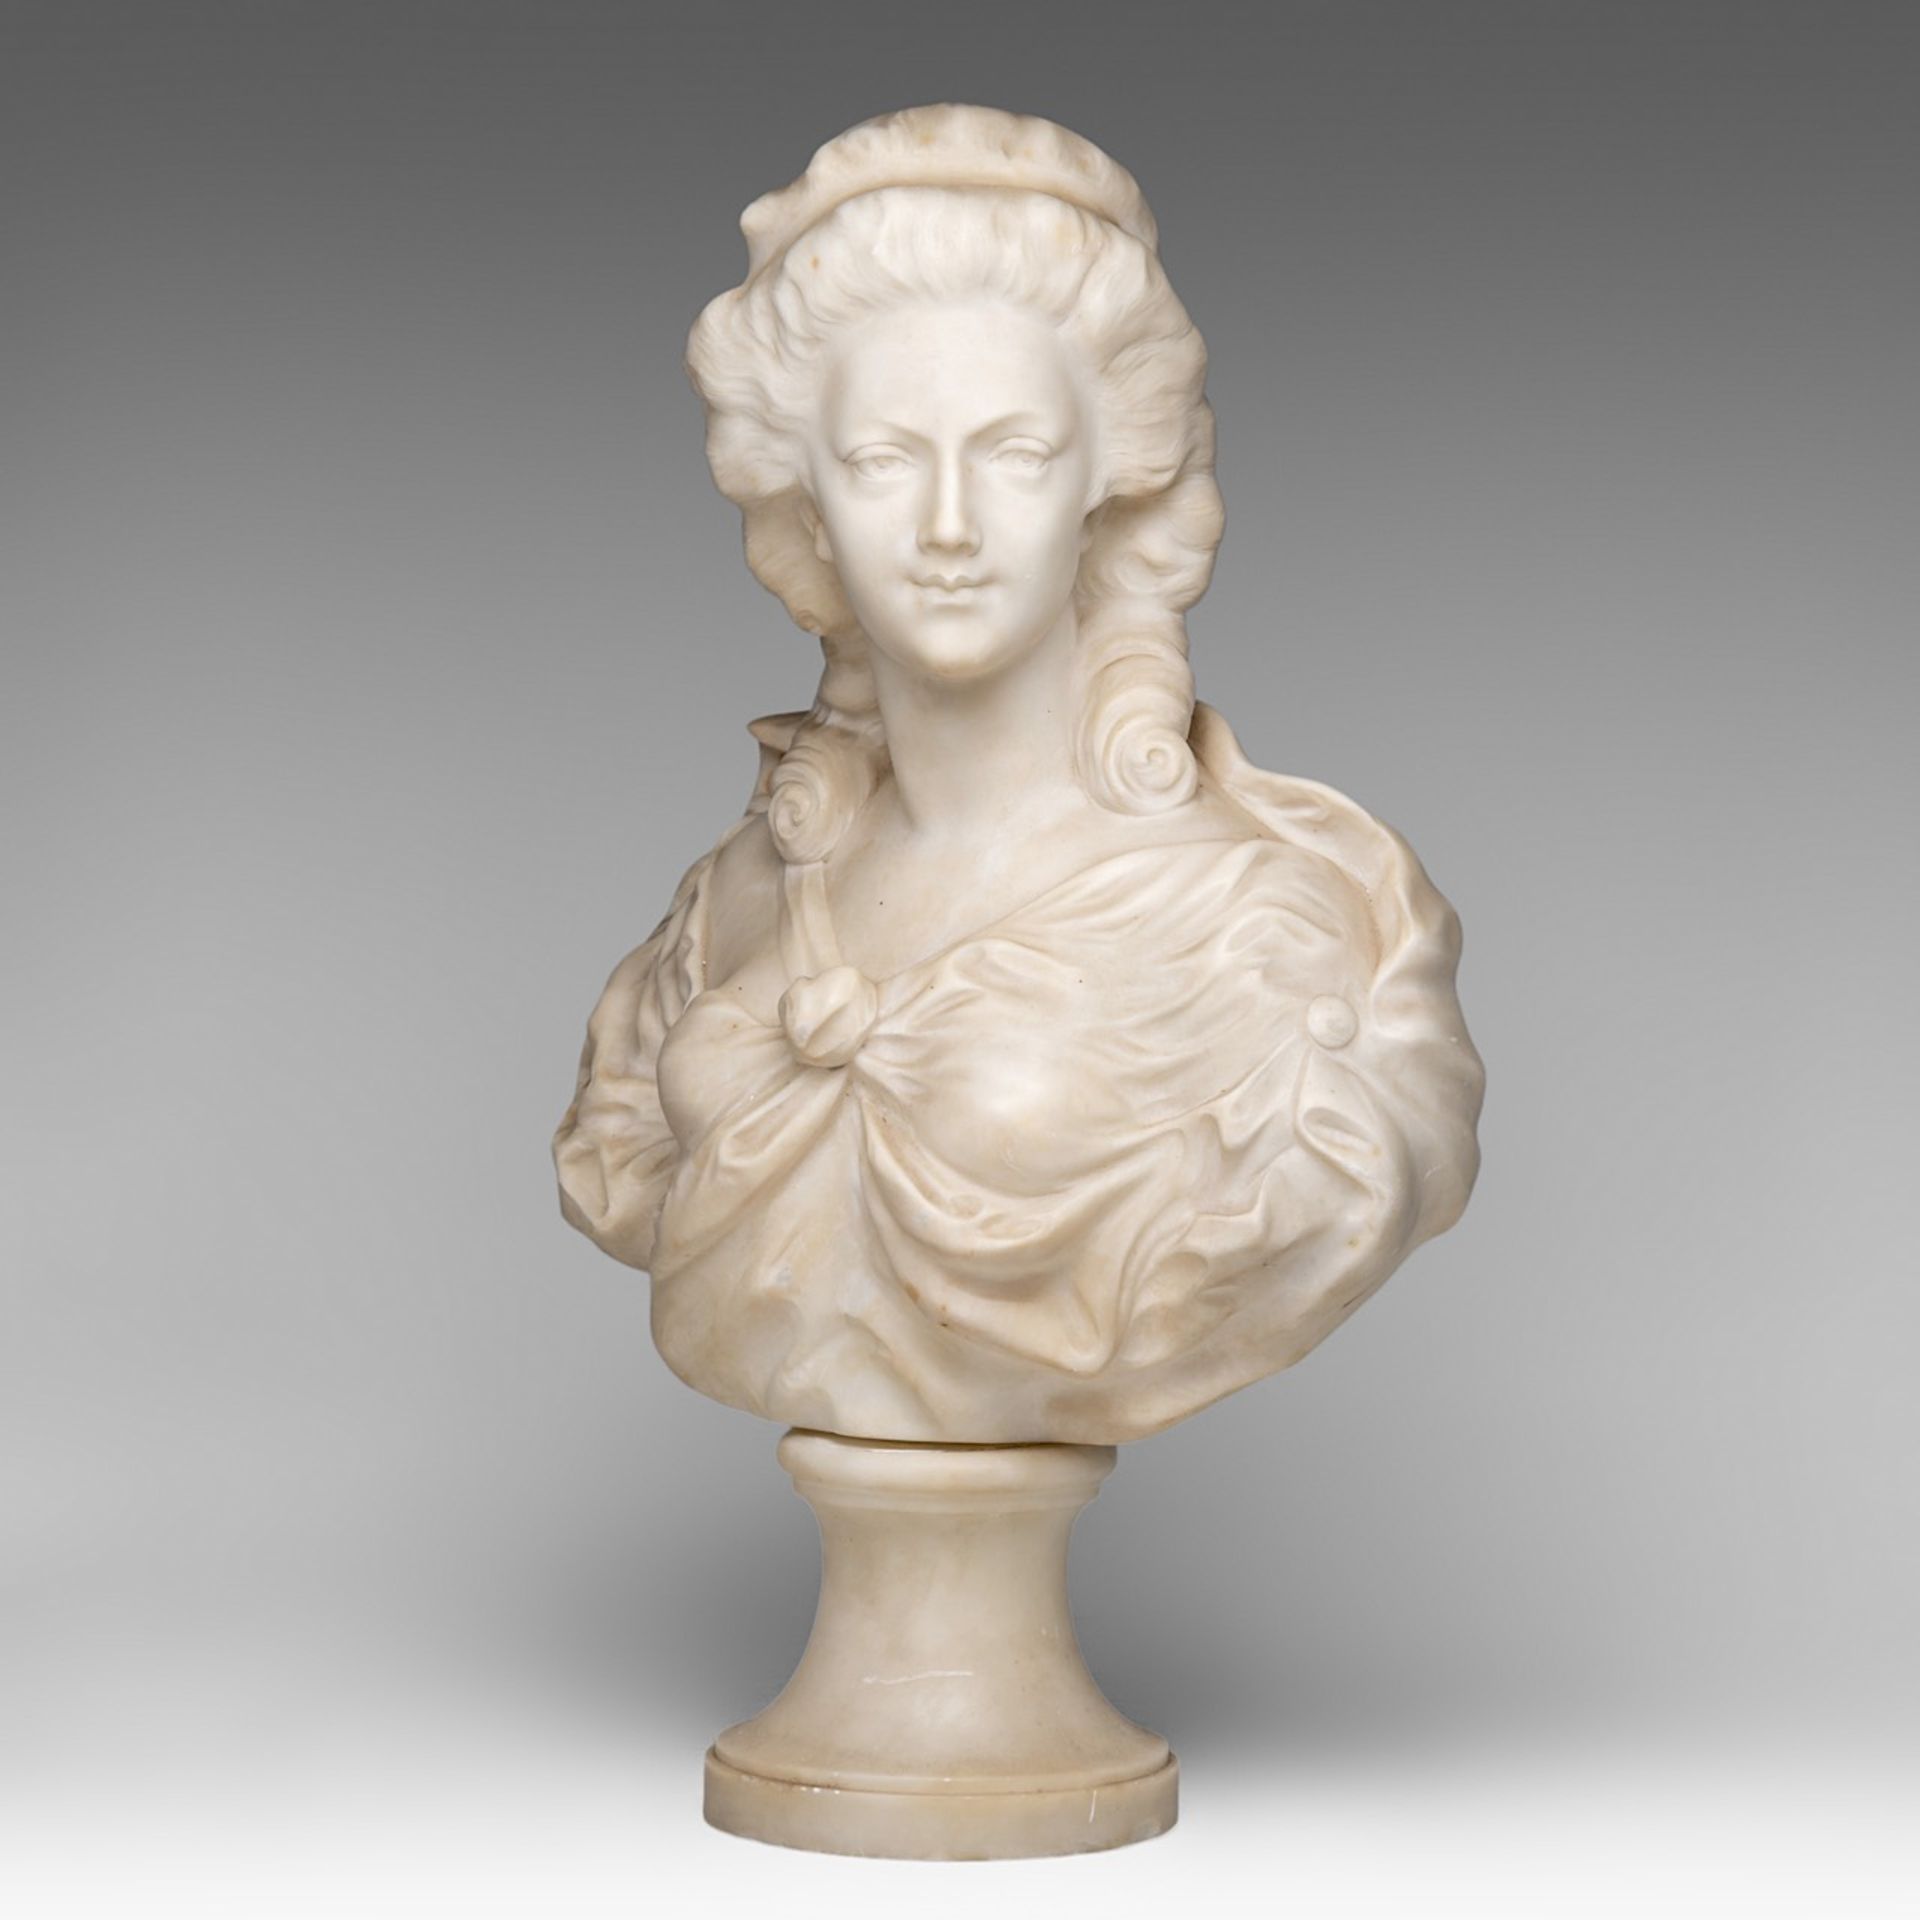 An alabaster bust of a female beauty in the Louis XVI era (Marie-Antoinette?), H 56 cm - Image 2 of 5